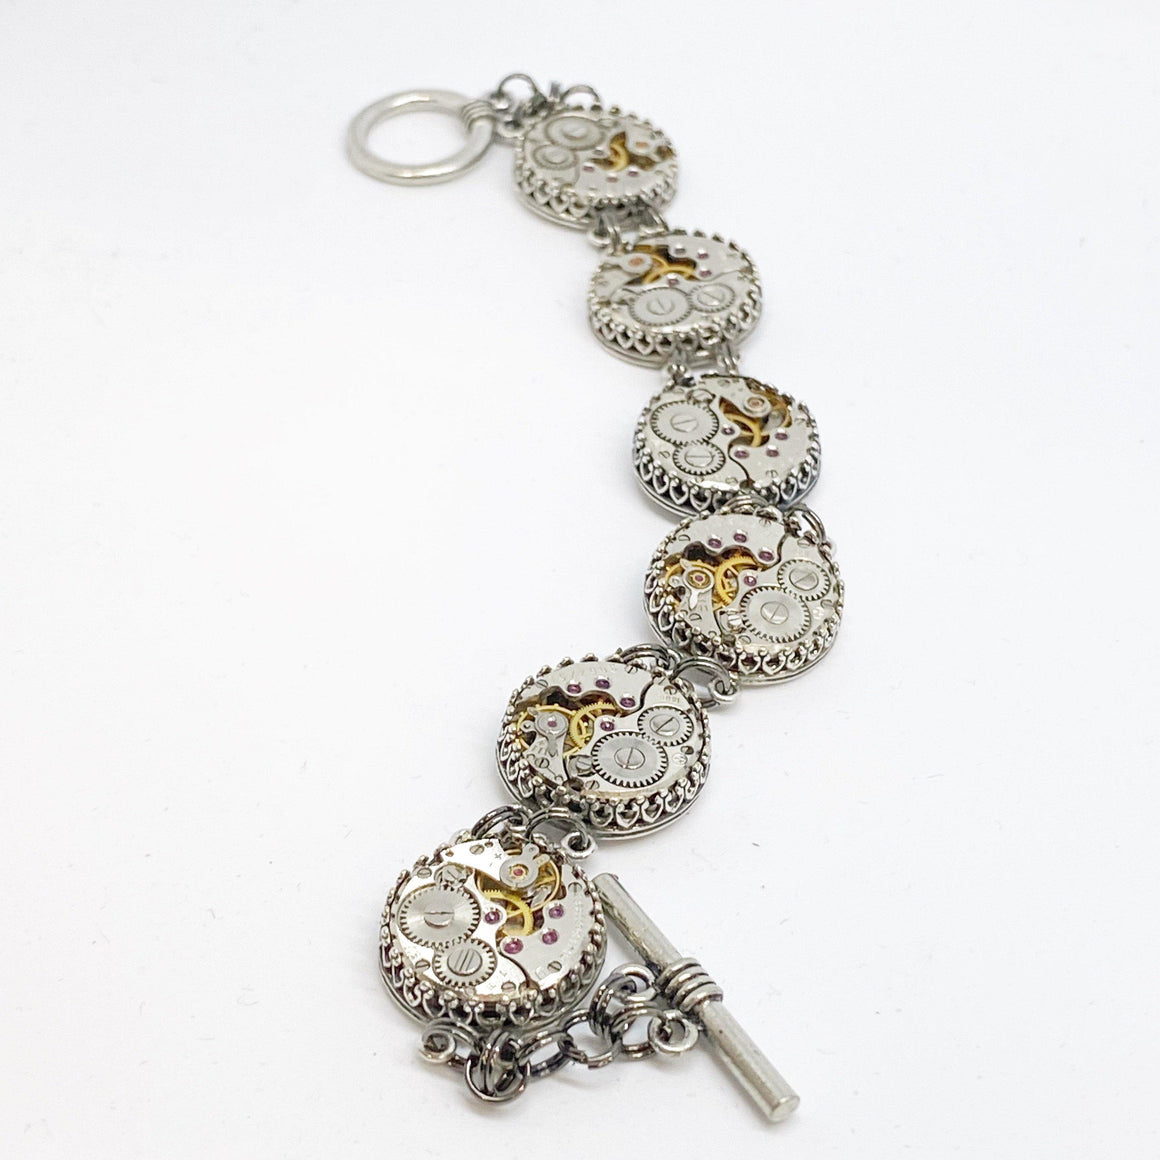 Mary, Double Link Station Bracelet - The Victorian Magpie